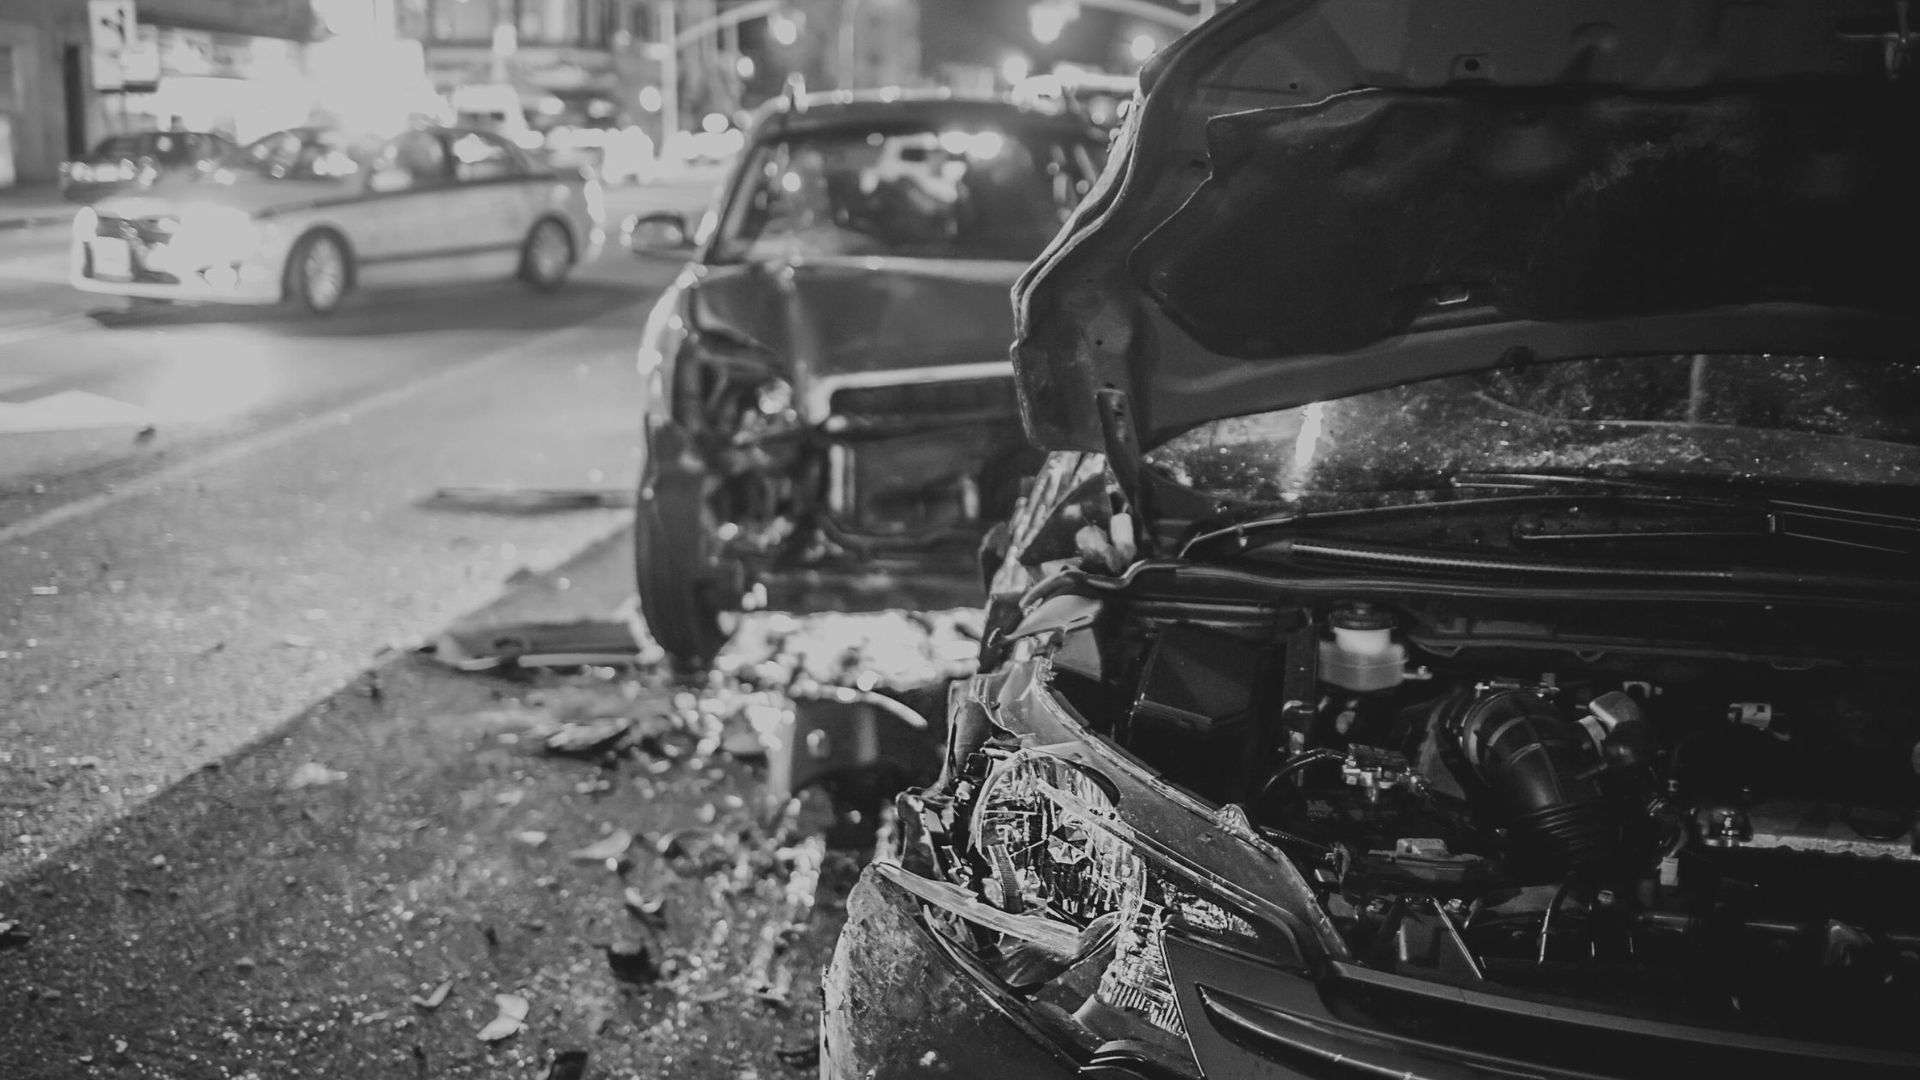 Vehicular Accident Investigation and Expert Witness